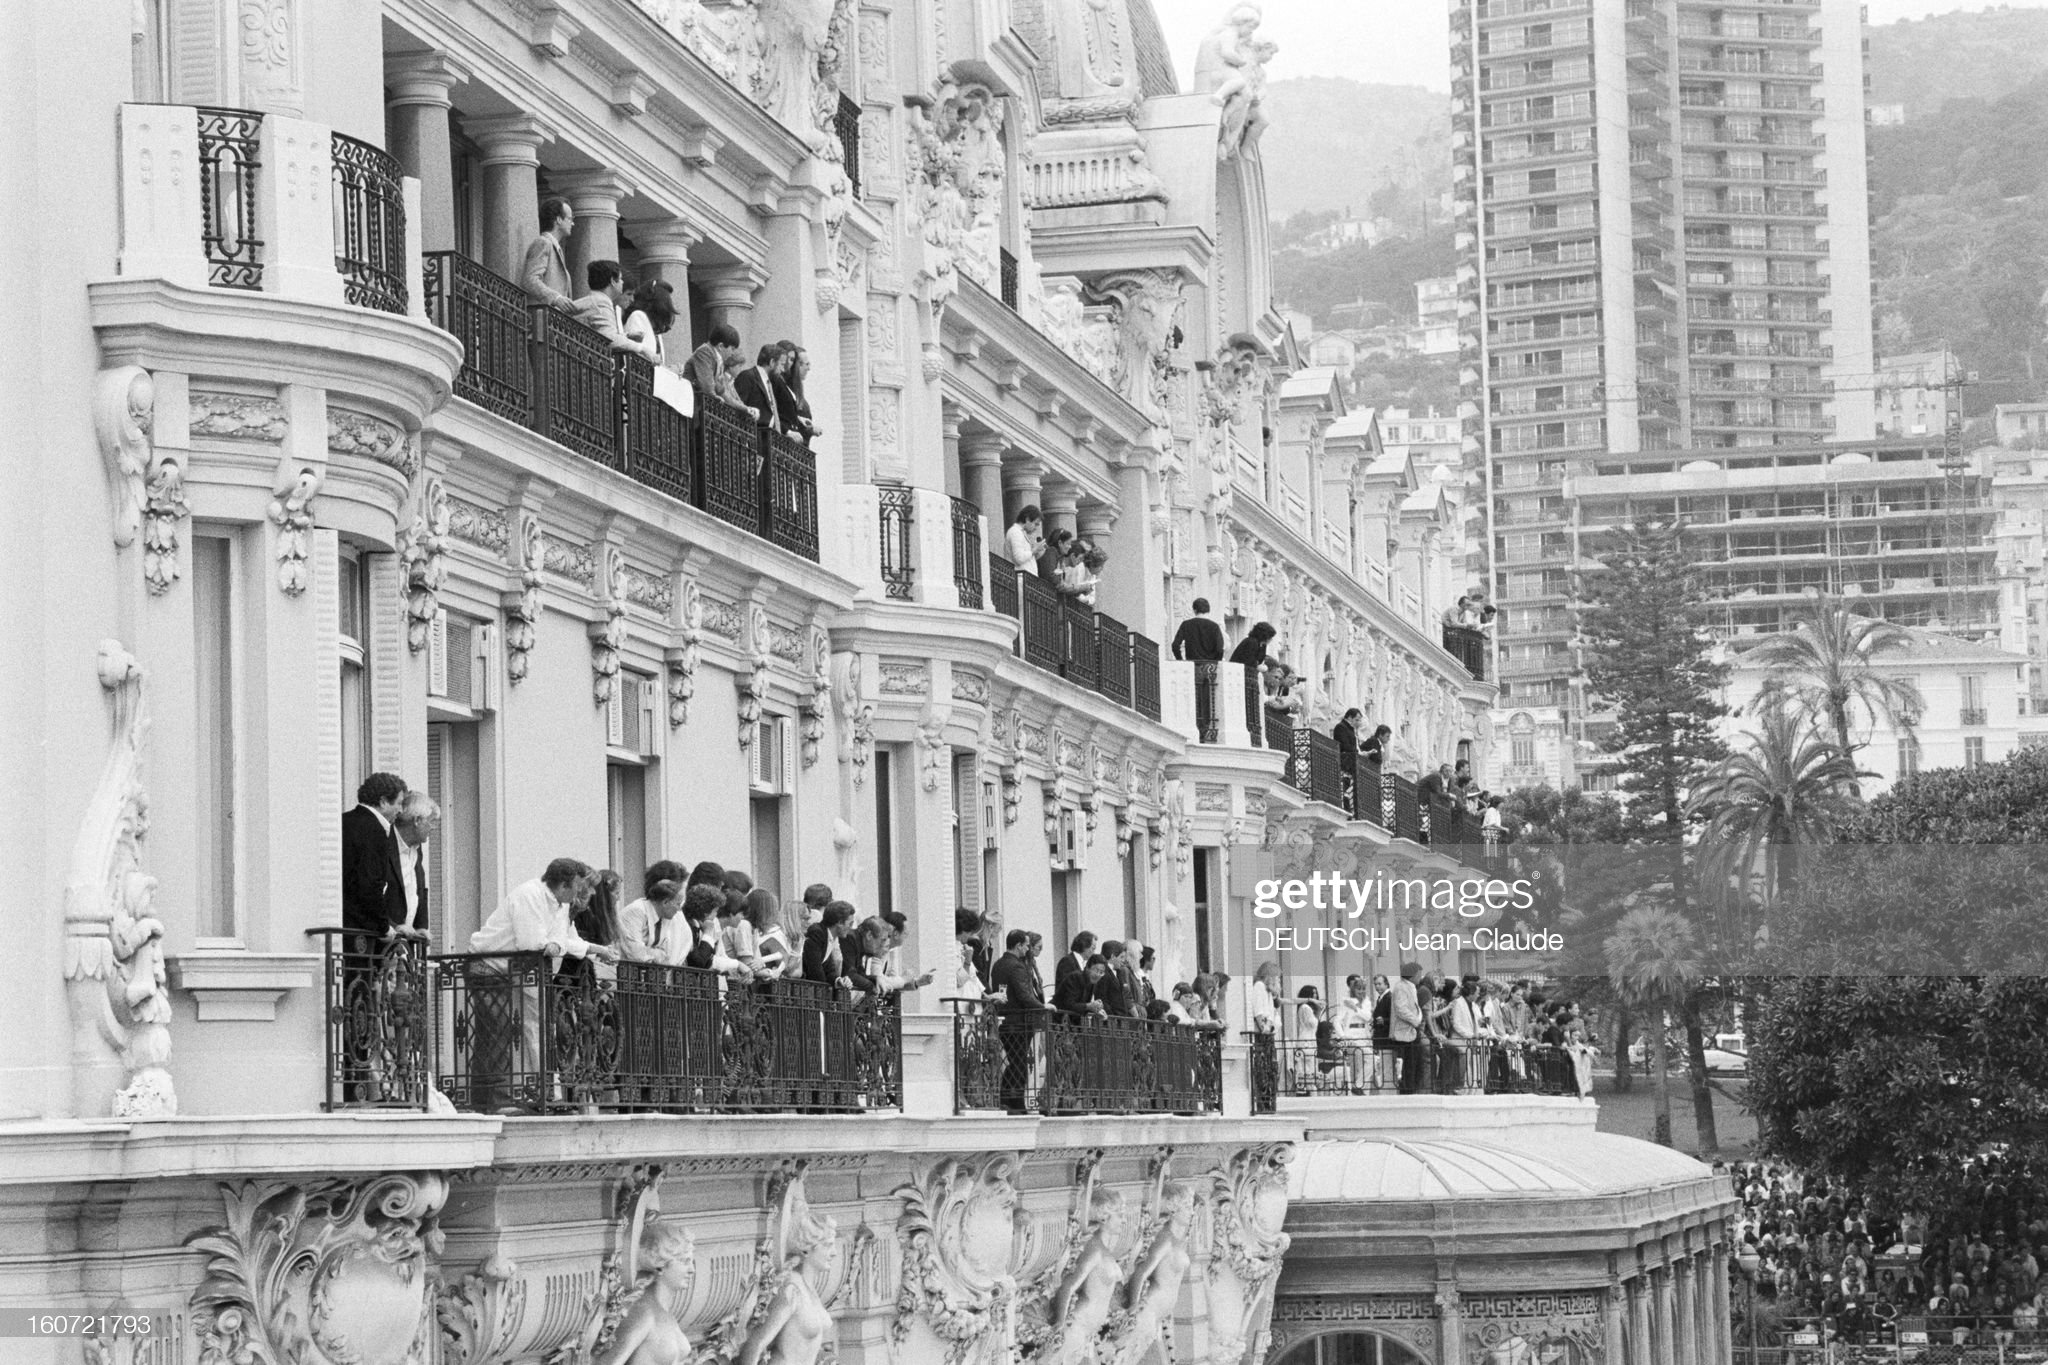 On May 18, 1980, during the Monaco Formula 1 Grand Prix, men and women on the balcony of a hotel watching the race.